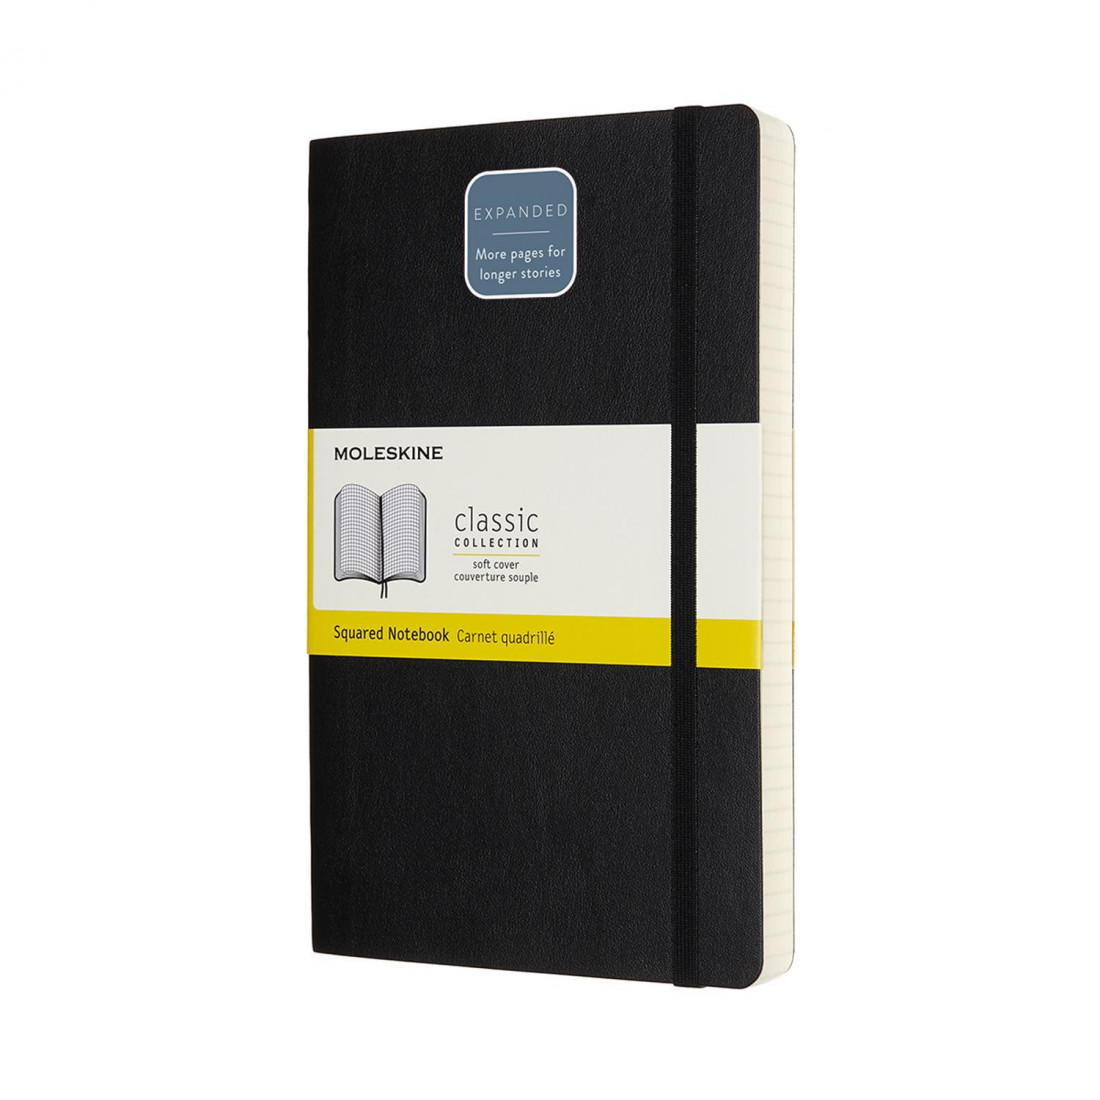 Notebook Large 13x21 Squared Expanded Version Black Soft Cover Moleskine